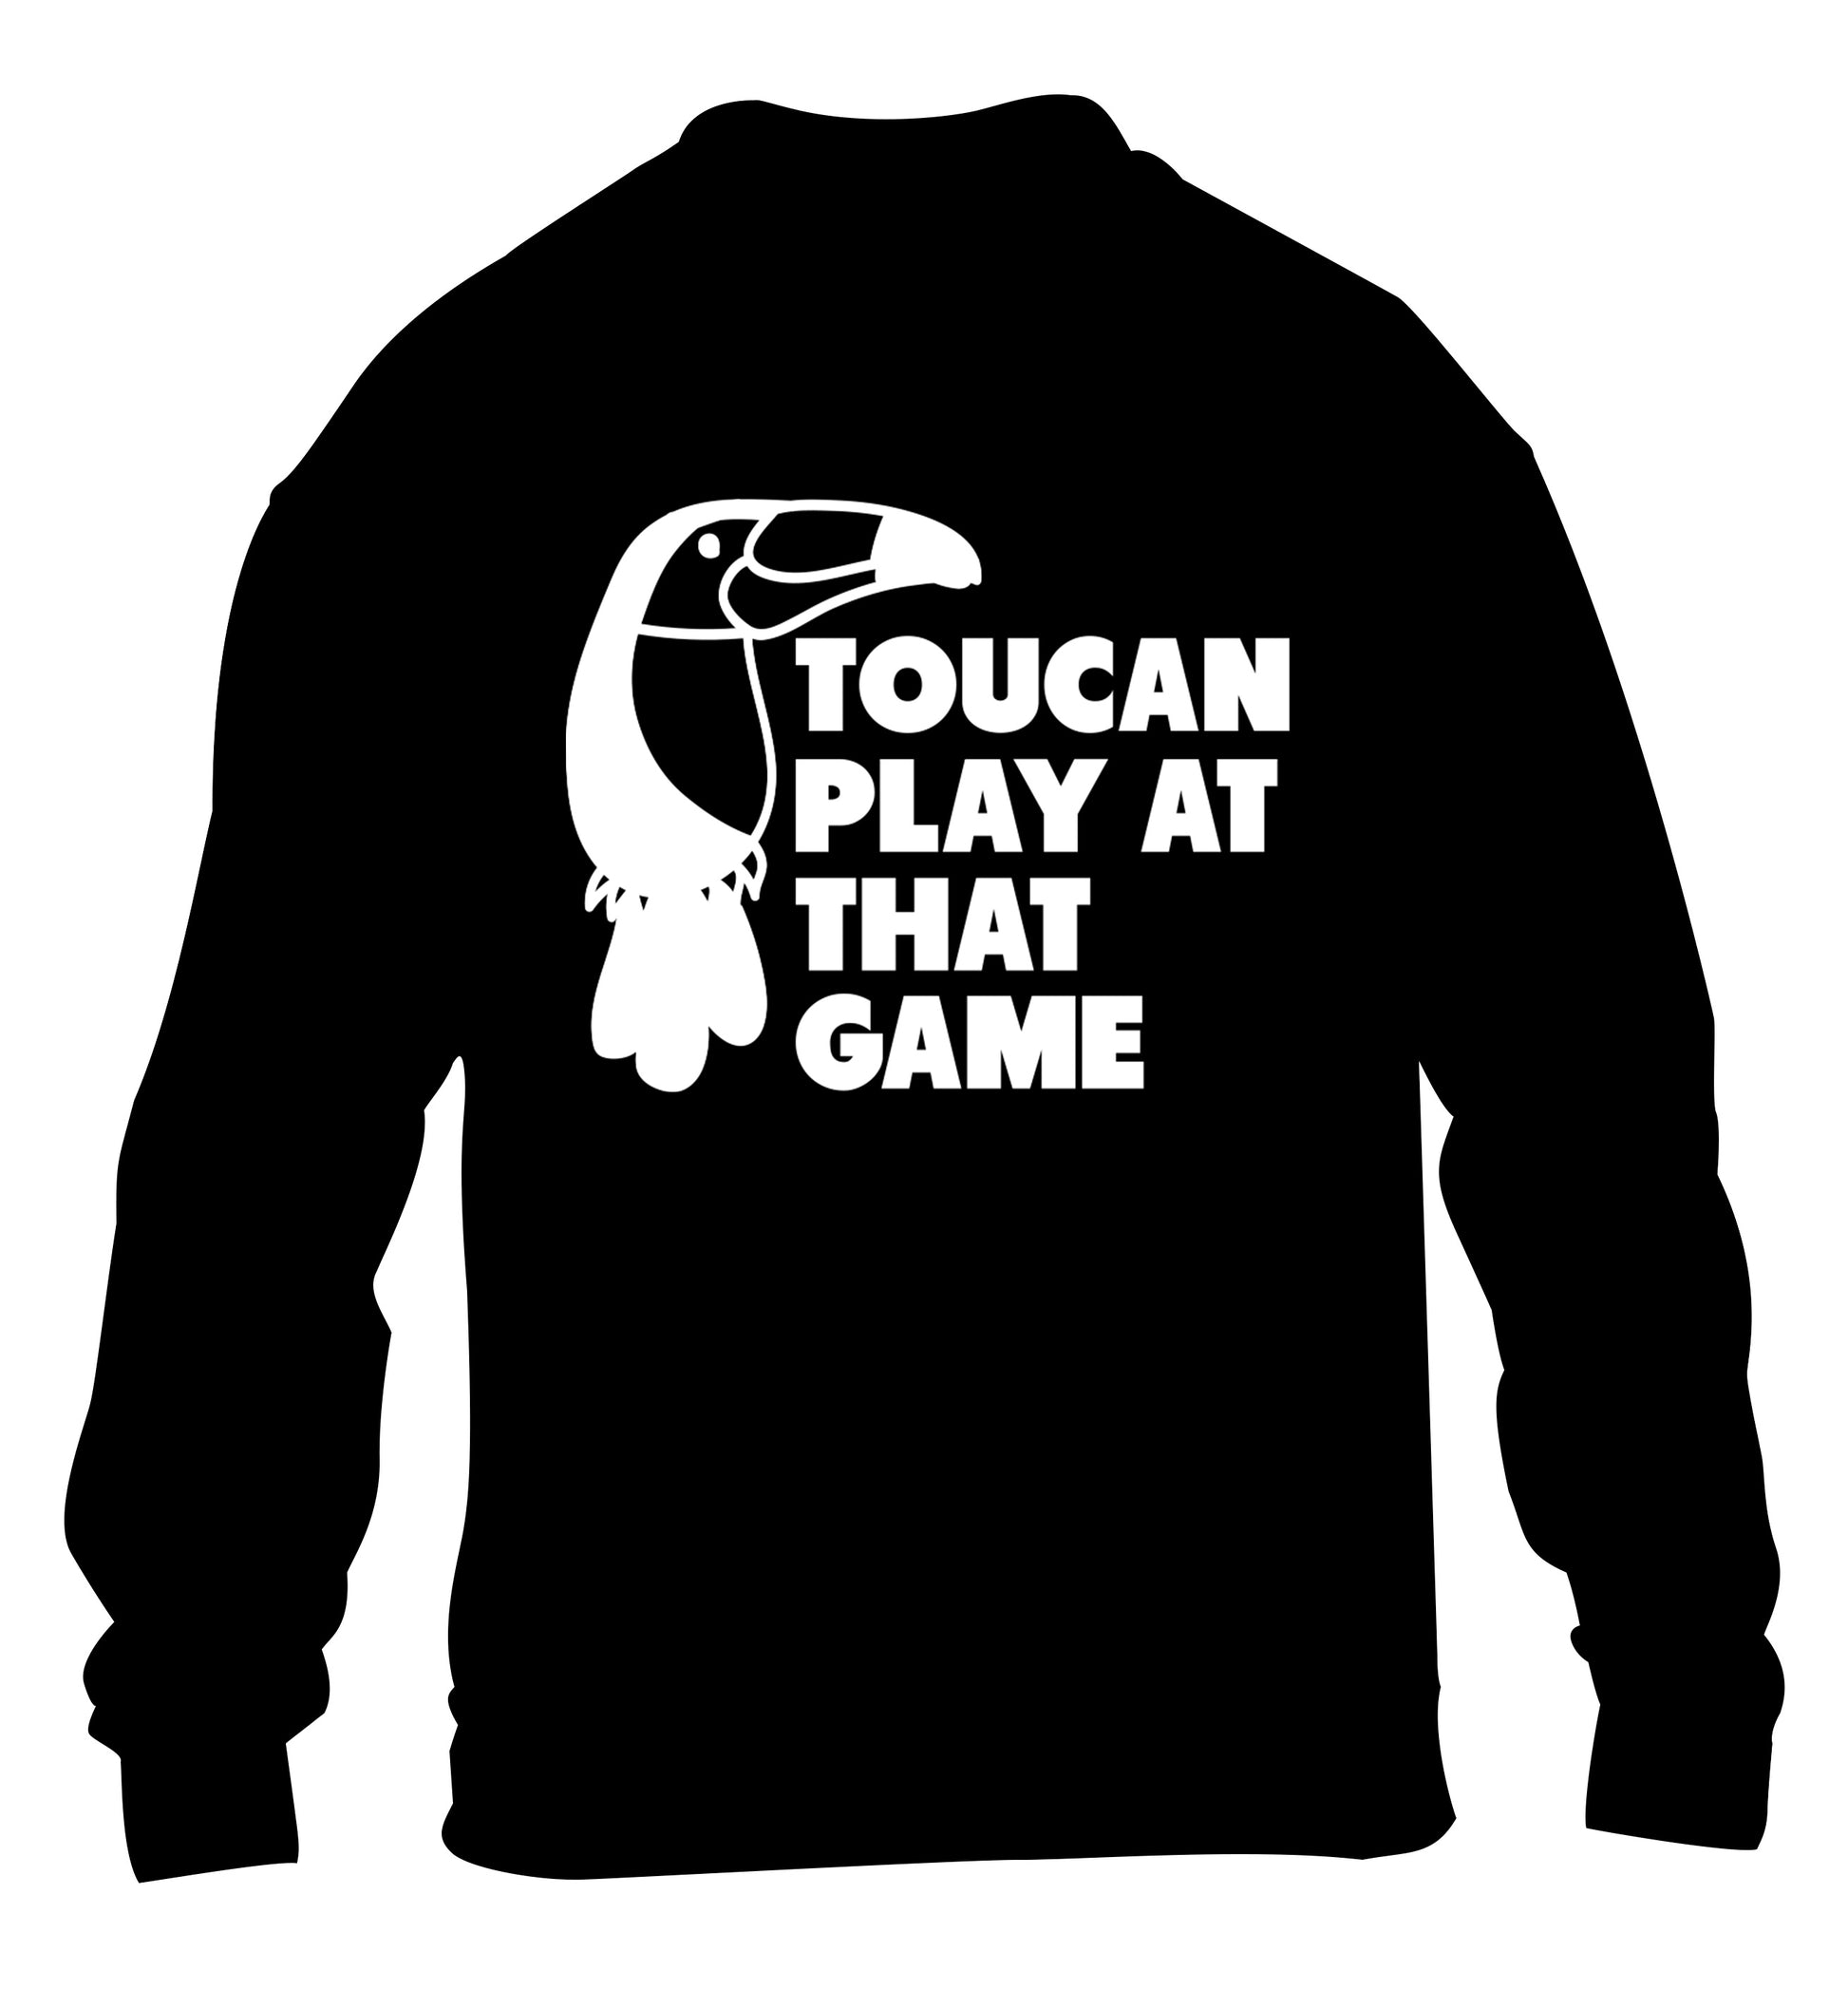 Toucan play at that game children's black sweater 12-13 Years